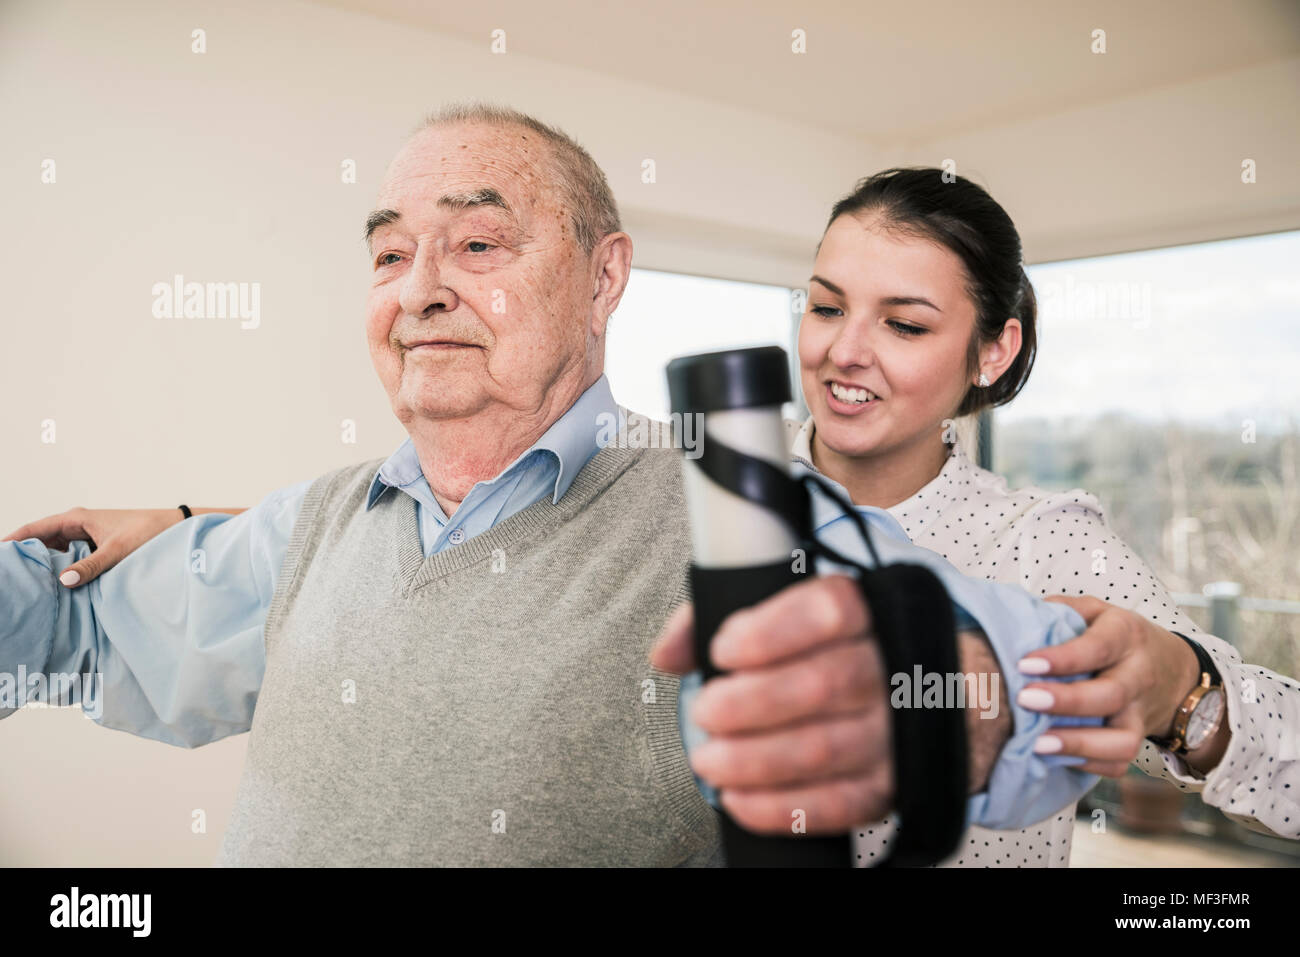 Young woman supporting senior man doing an arm exercise Stock Photo